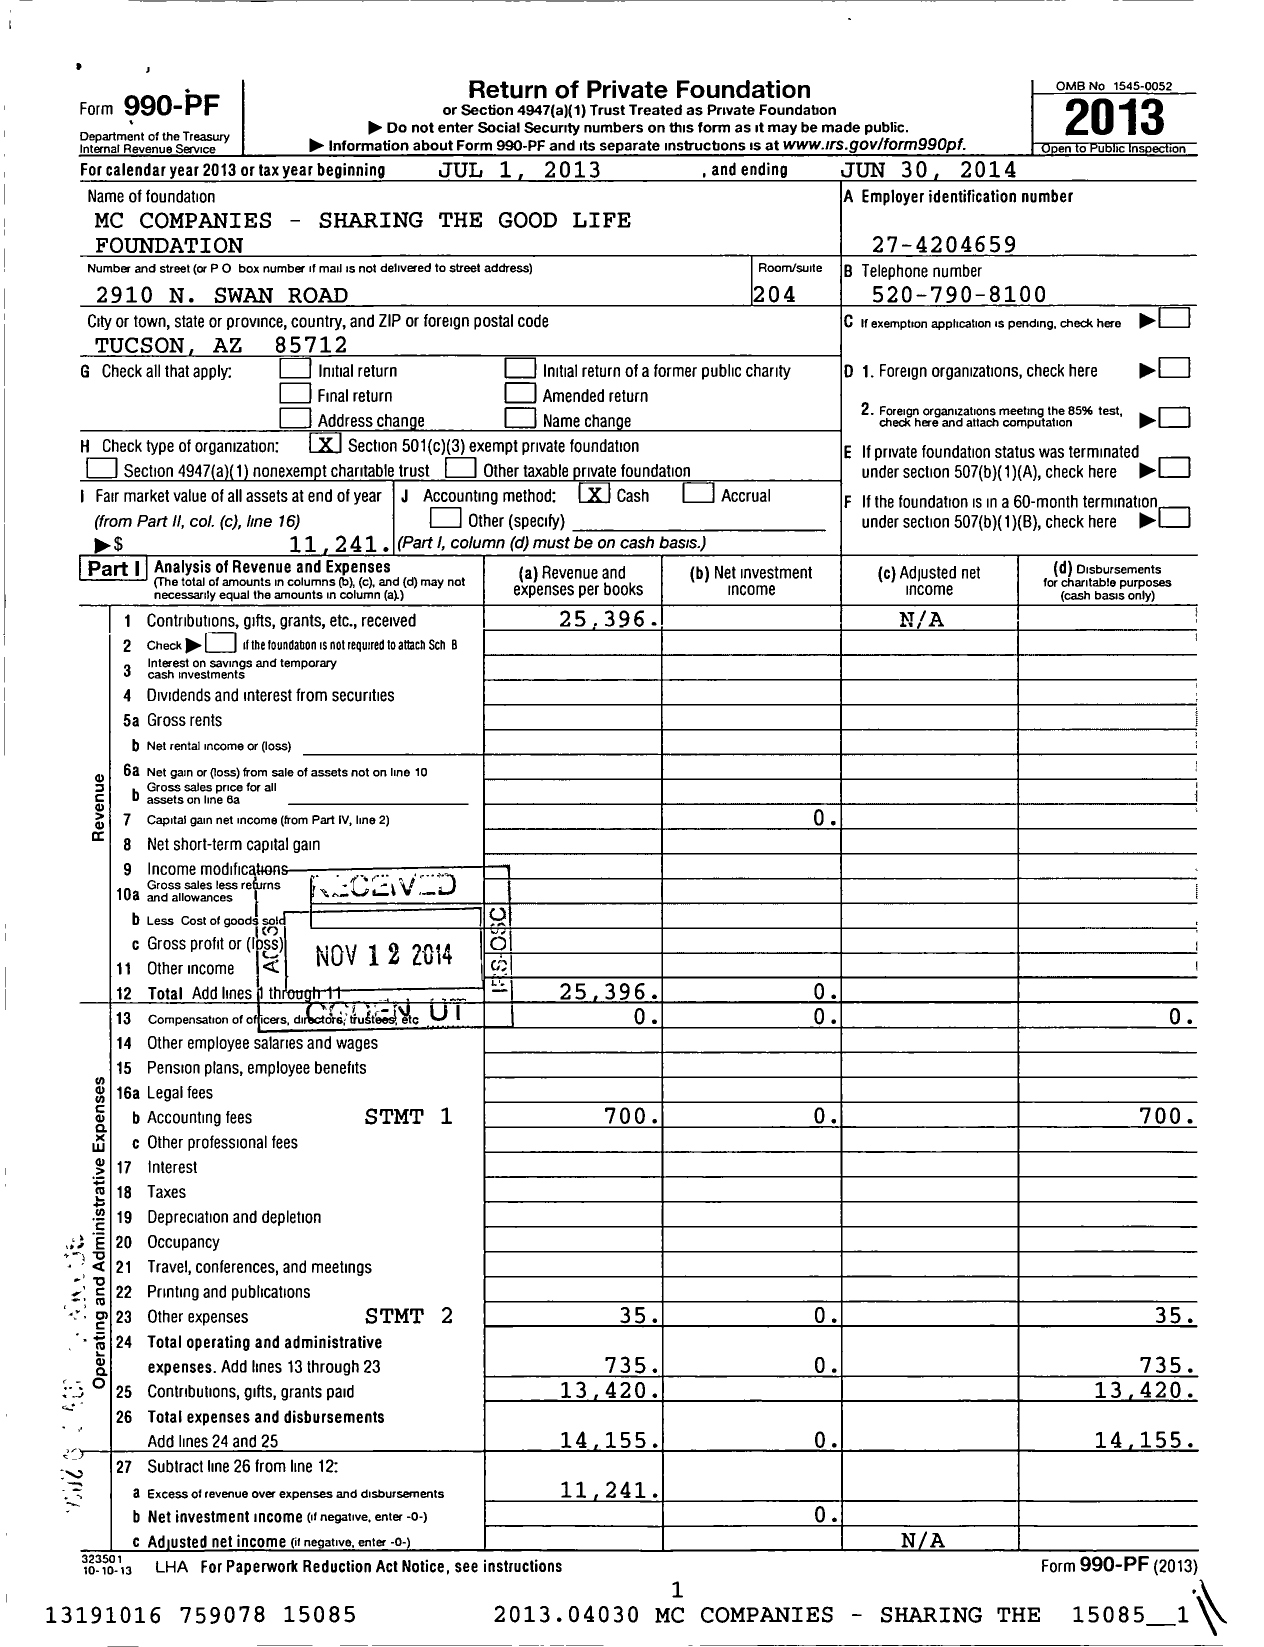 Image of first page of 2013 Form 990PF for MC Companies - Sharing the Good Life Foundation